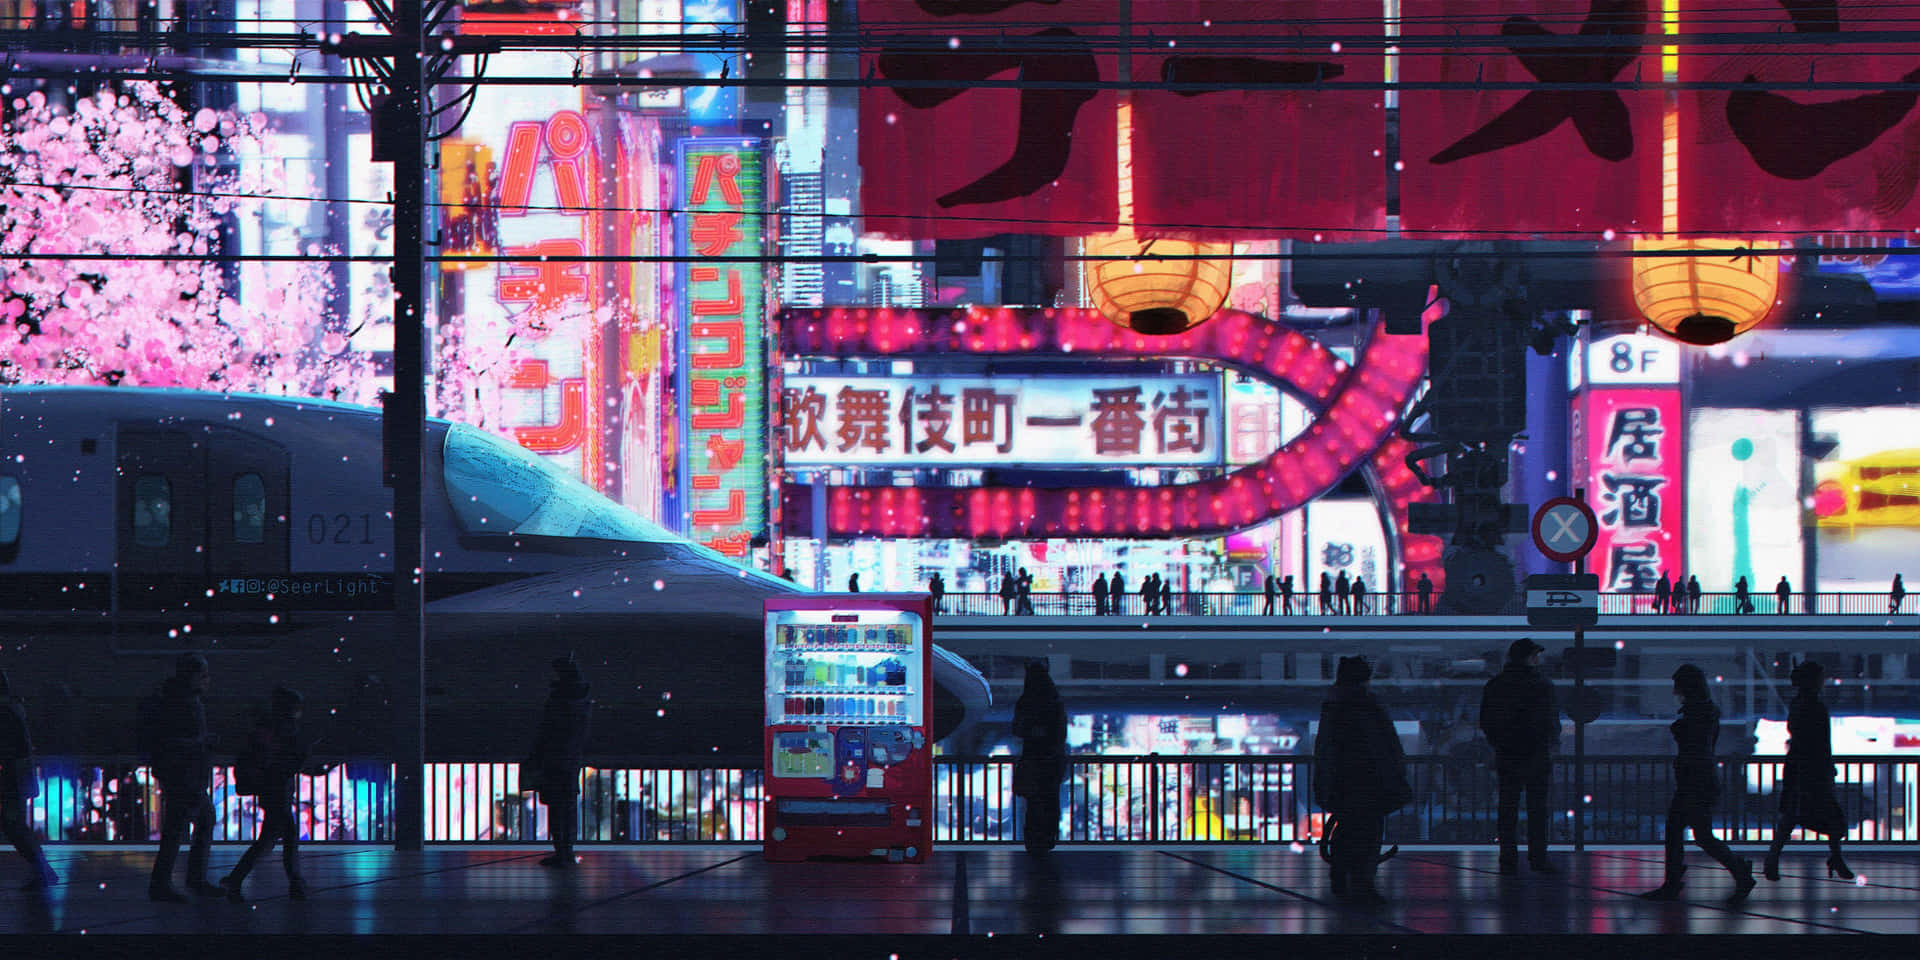 Explore Cyberpunk City's dazzling lights and towering structures